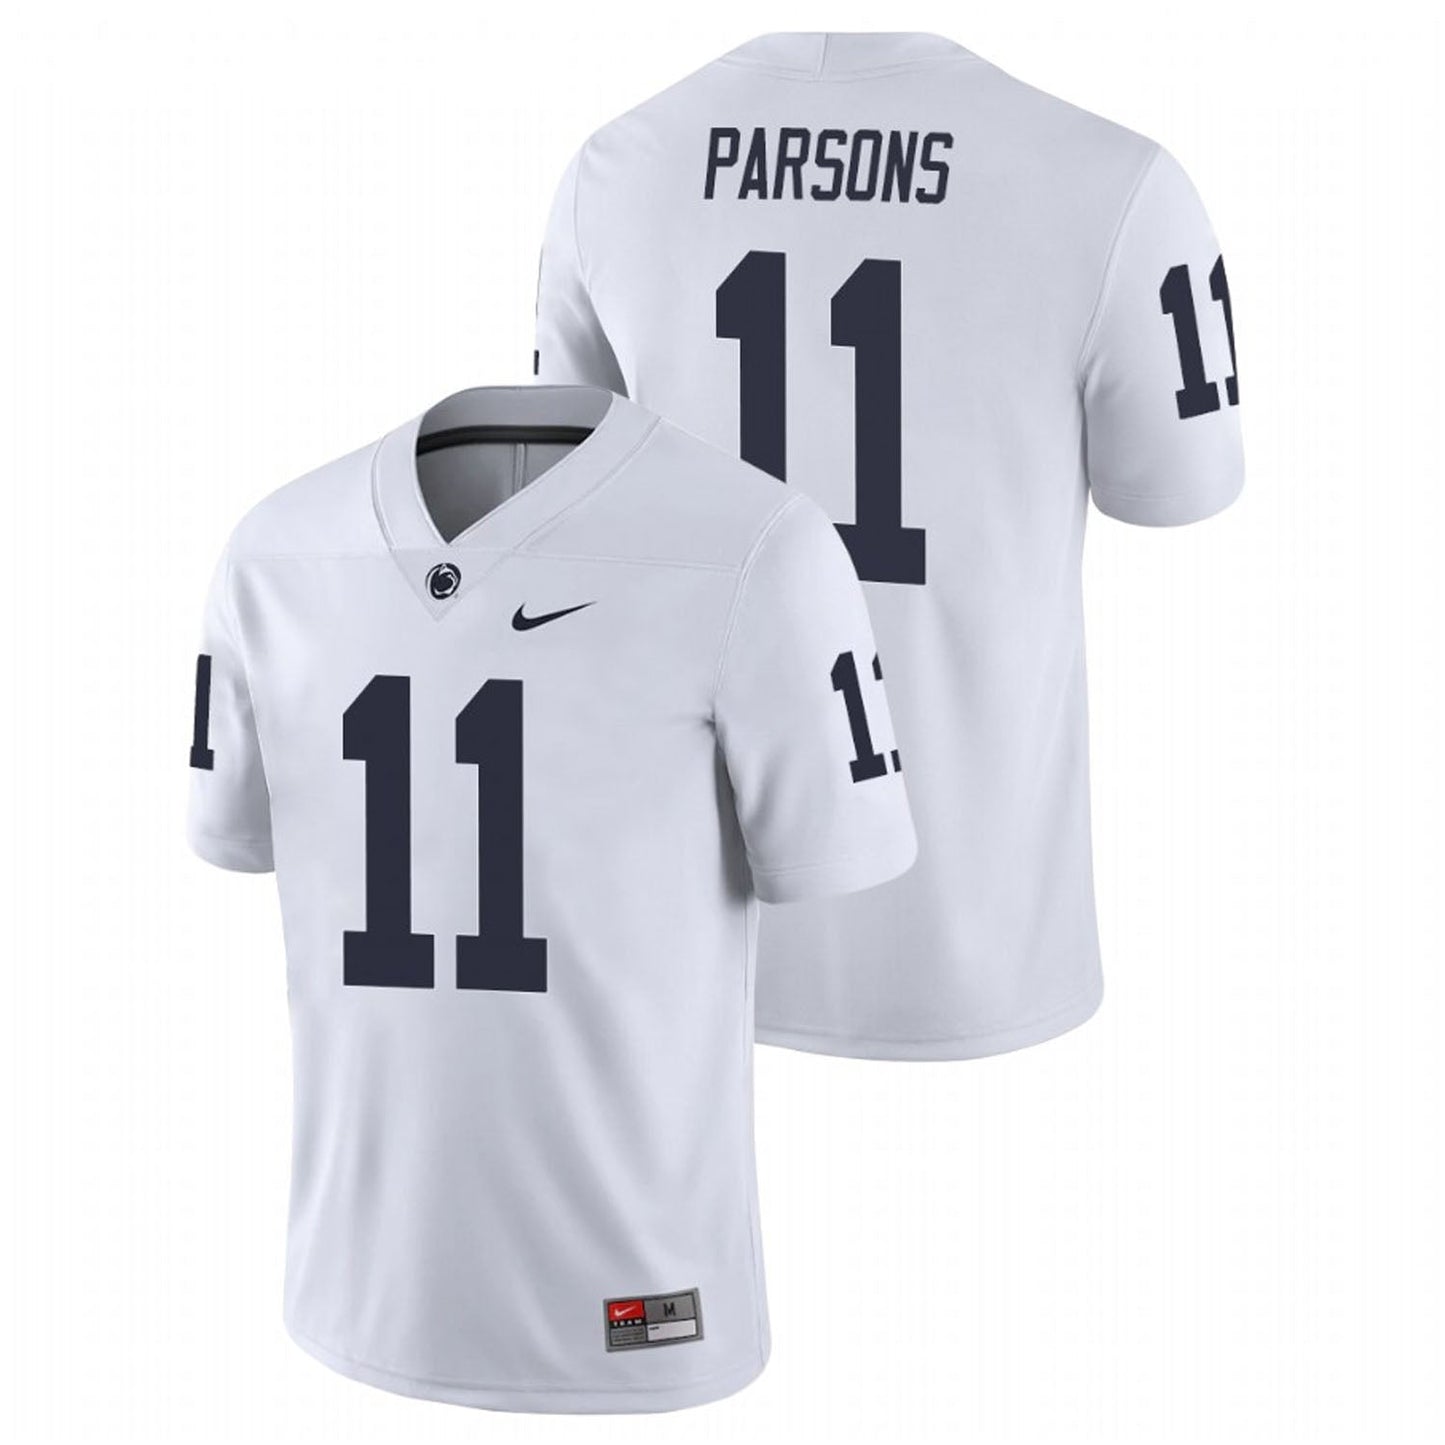 NCAAF Micah Parsons Penn State Nittany Lions 11 Jersey